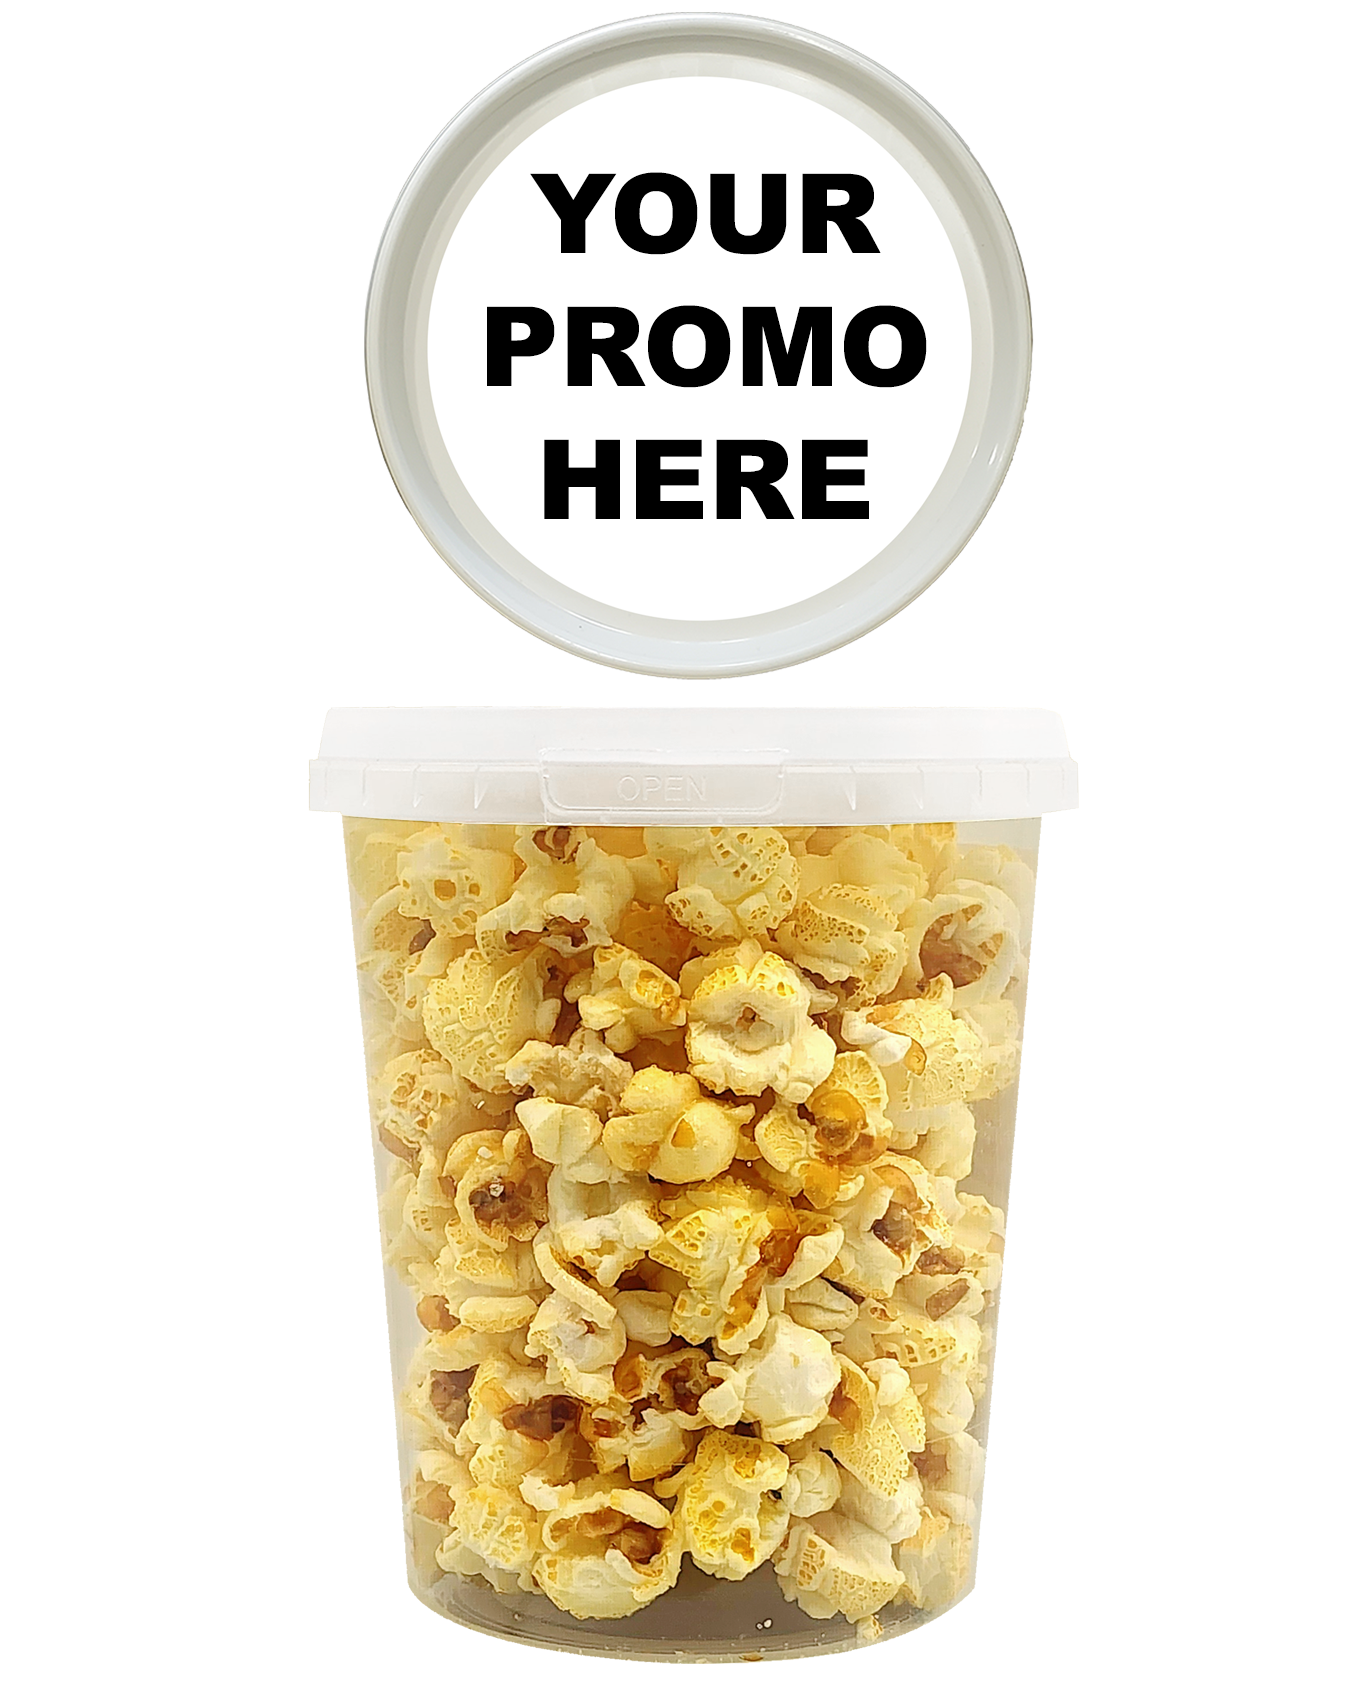 Promo Pop™ - Kettle Corn Classic (as low as $3.99 per bucket) Case of 12 Price